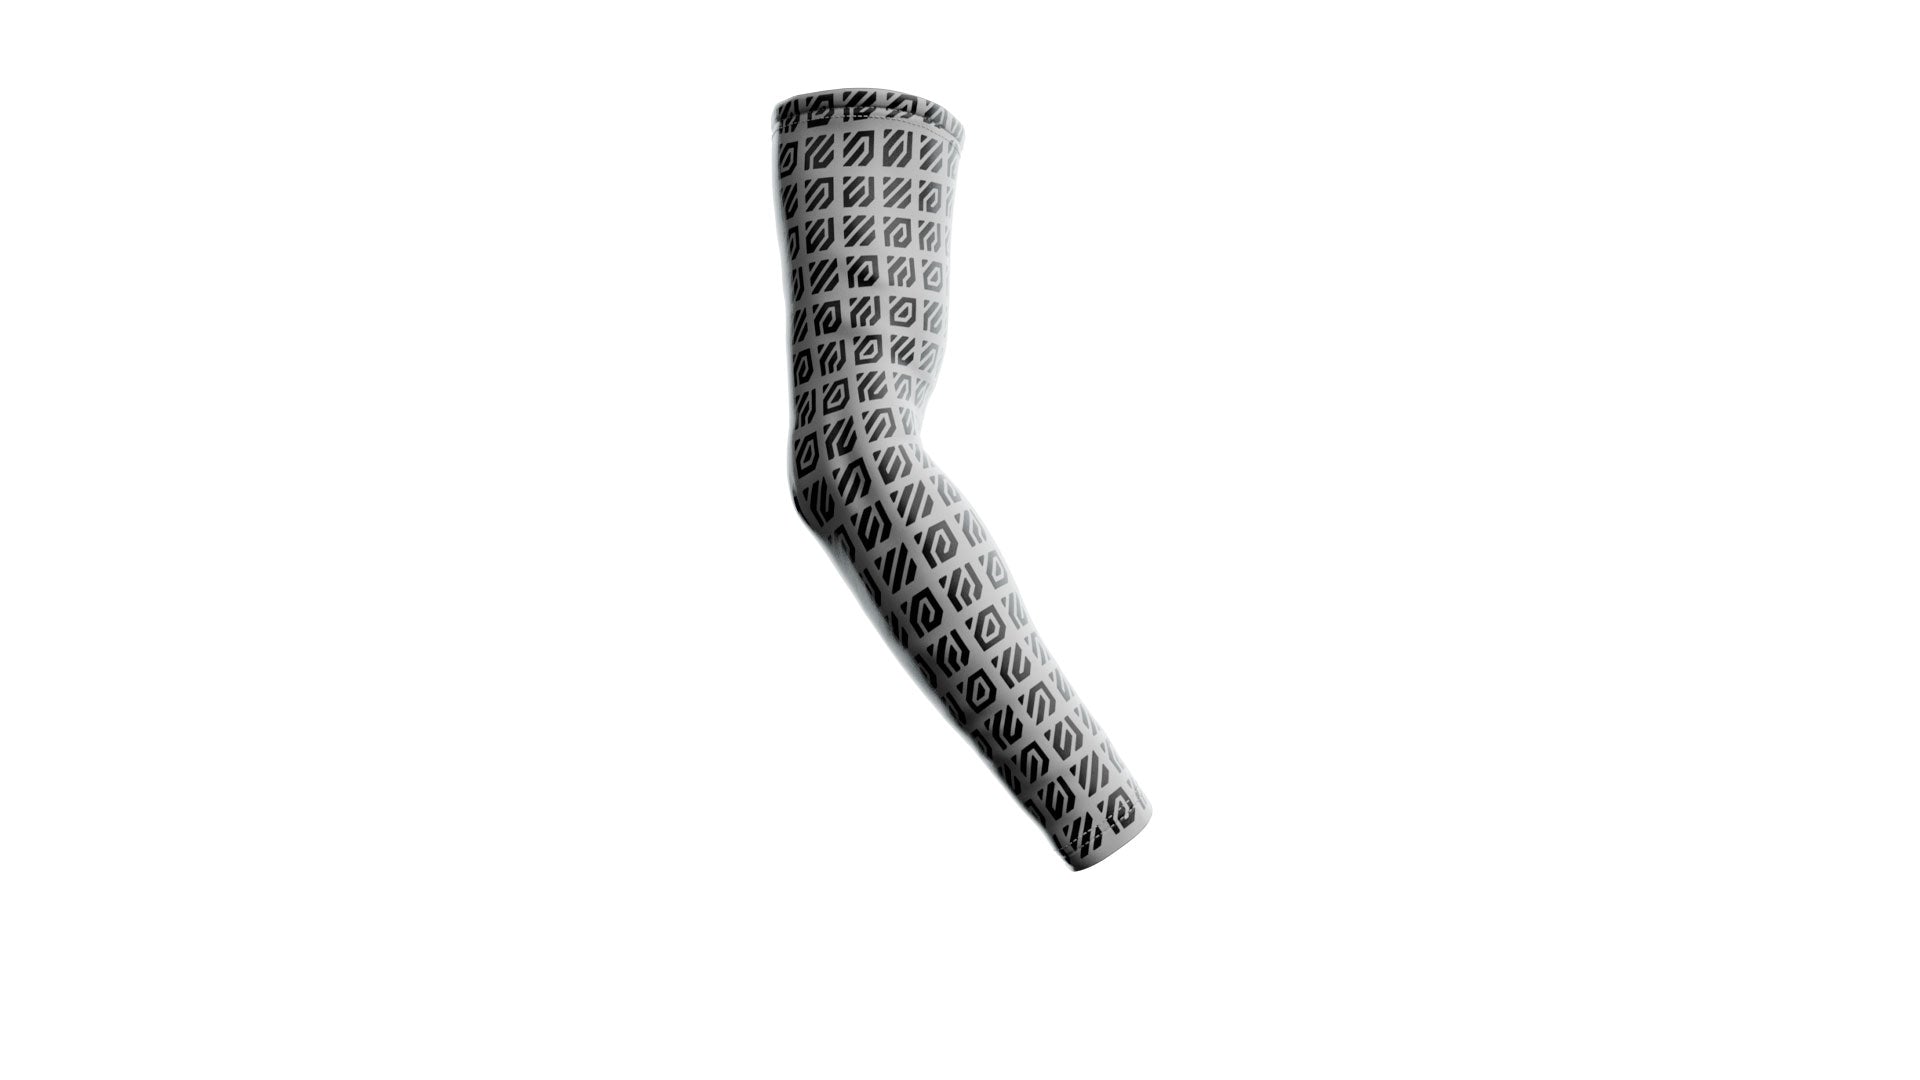 A white and black gaming arm compression sleeve